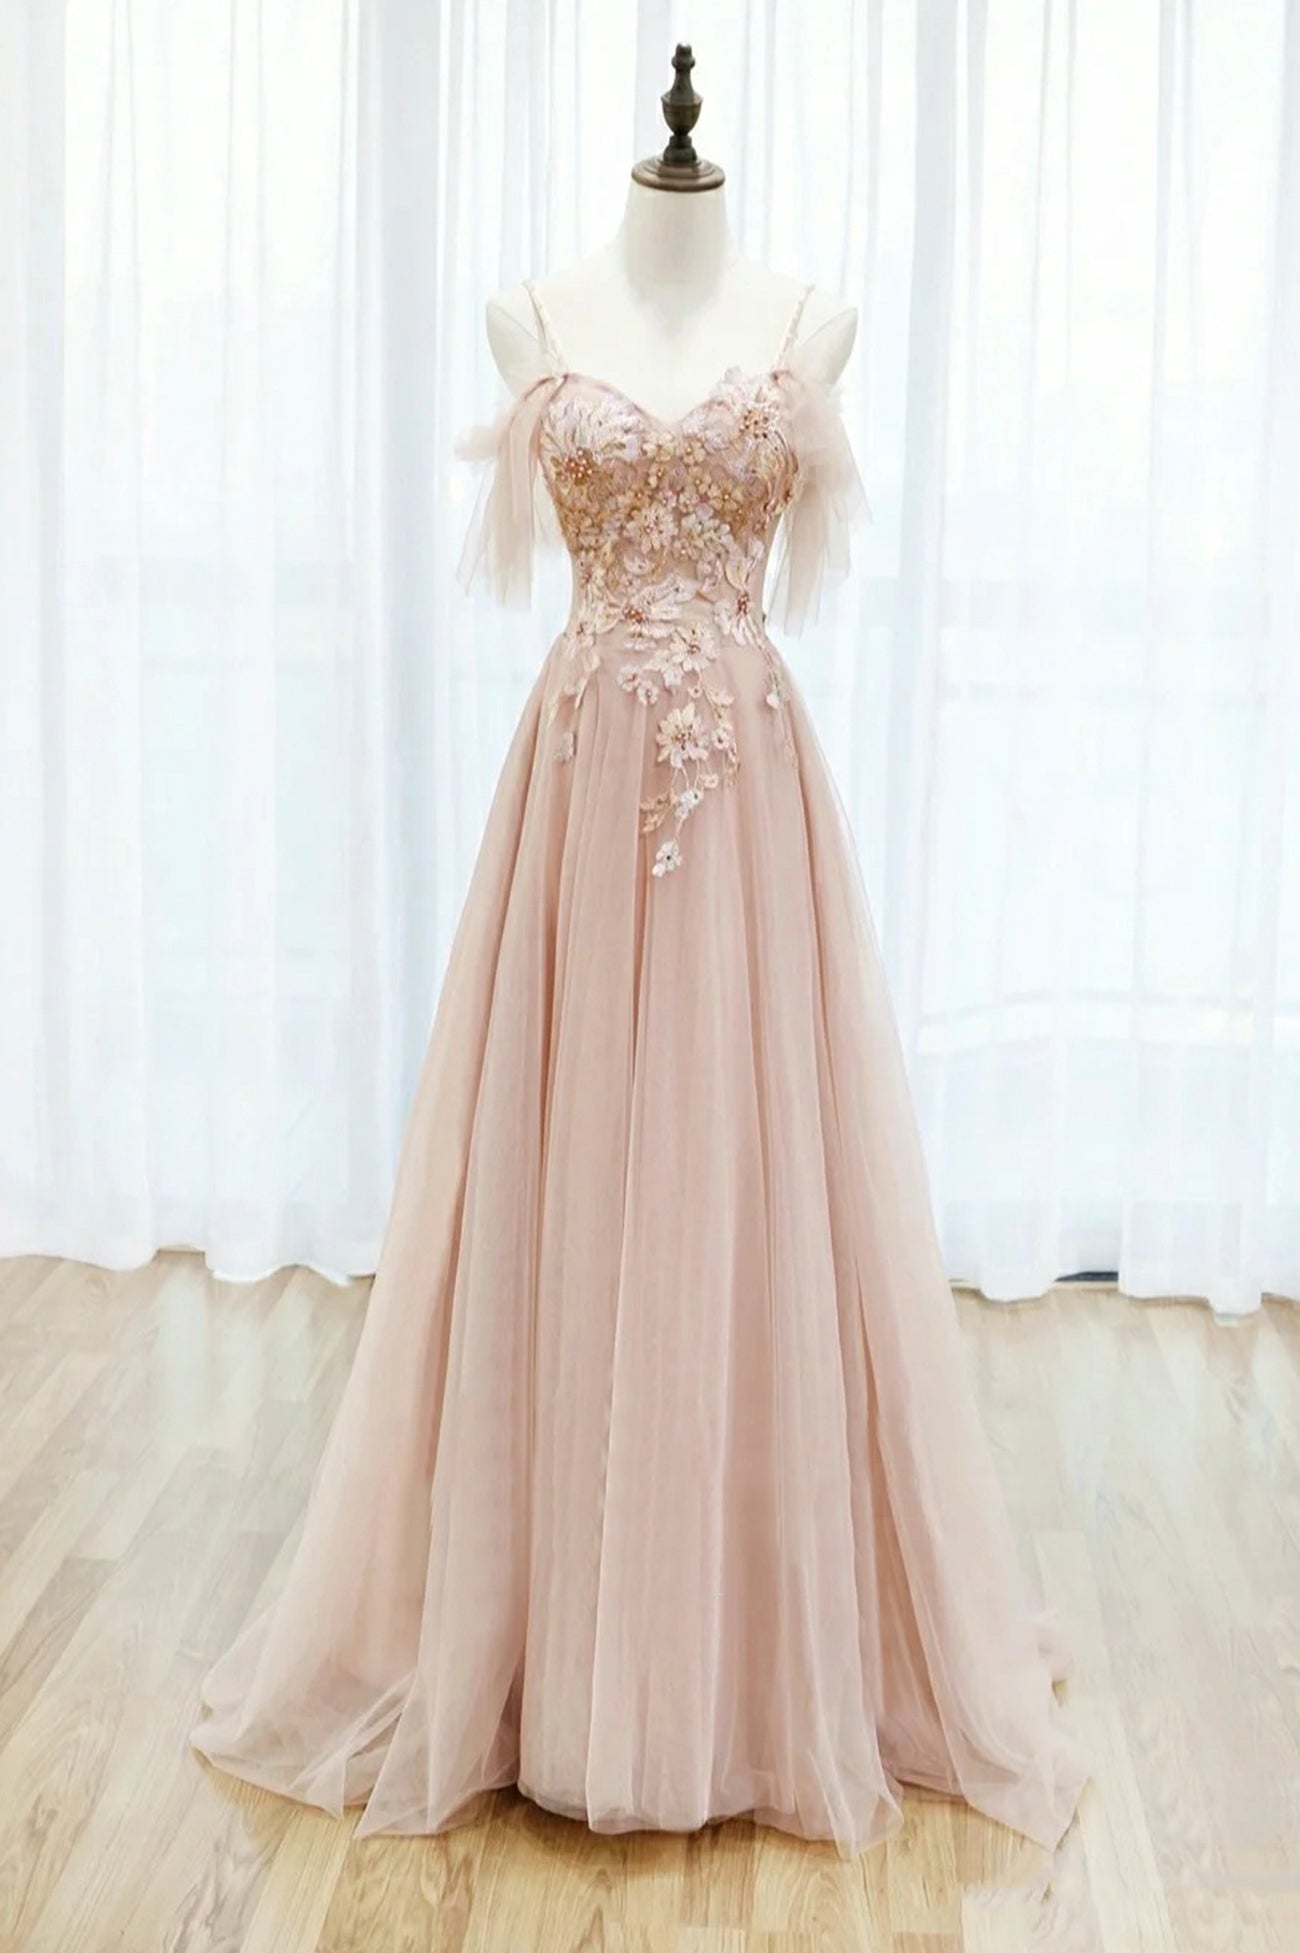 Pink Spaghetti Straps Lace Long Prom Dress Outfits For Girls, A-Line Evening Graduation Dress